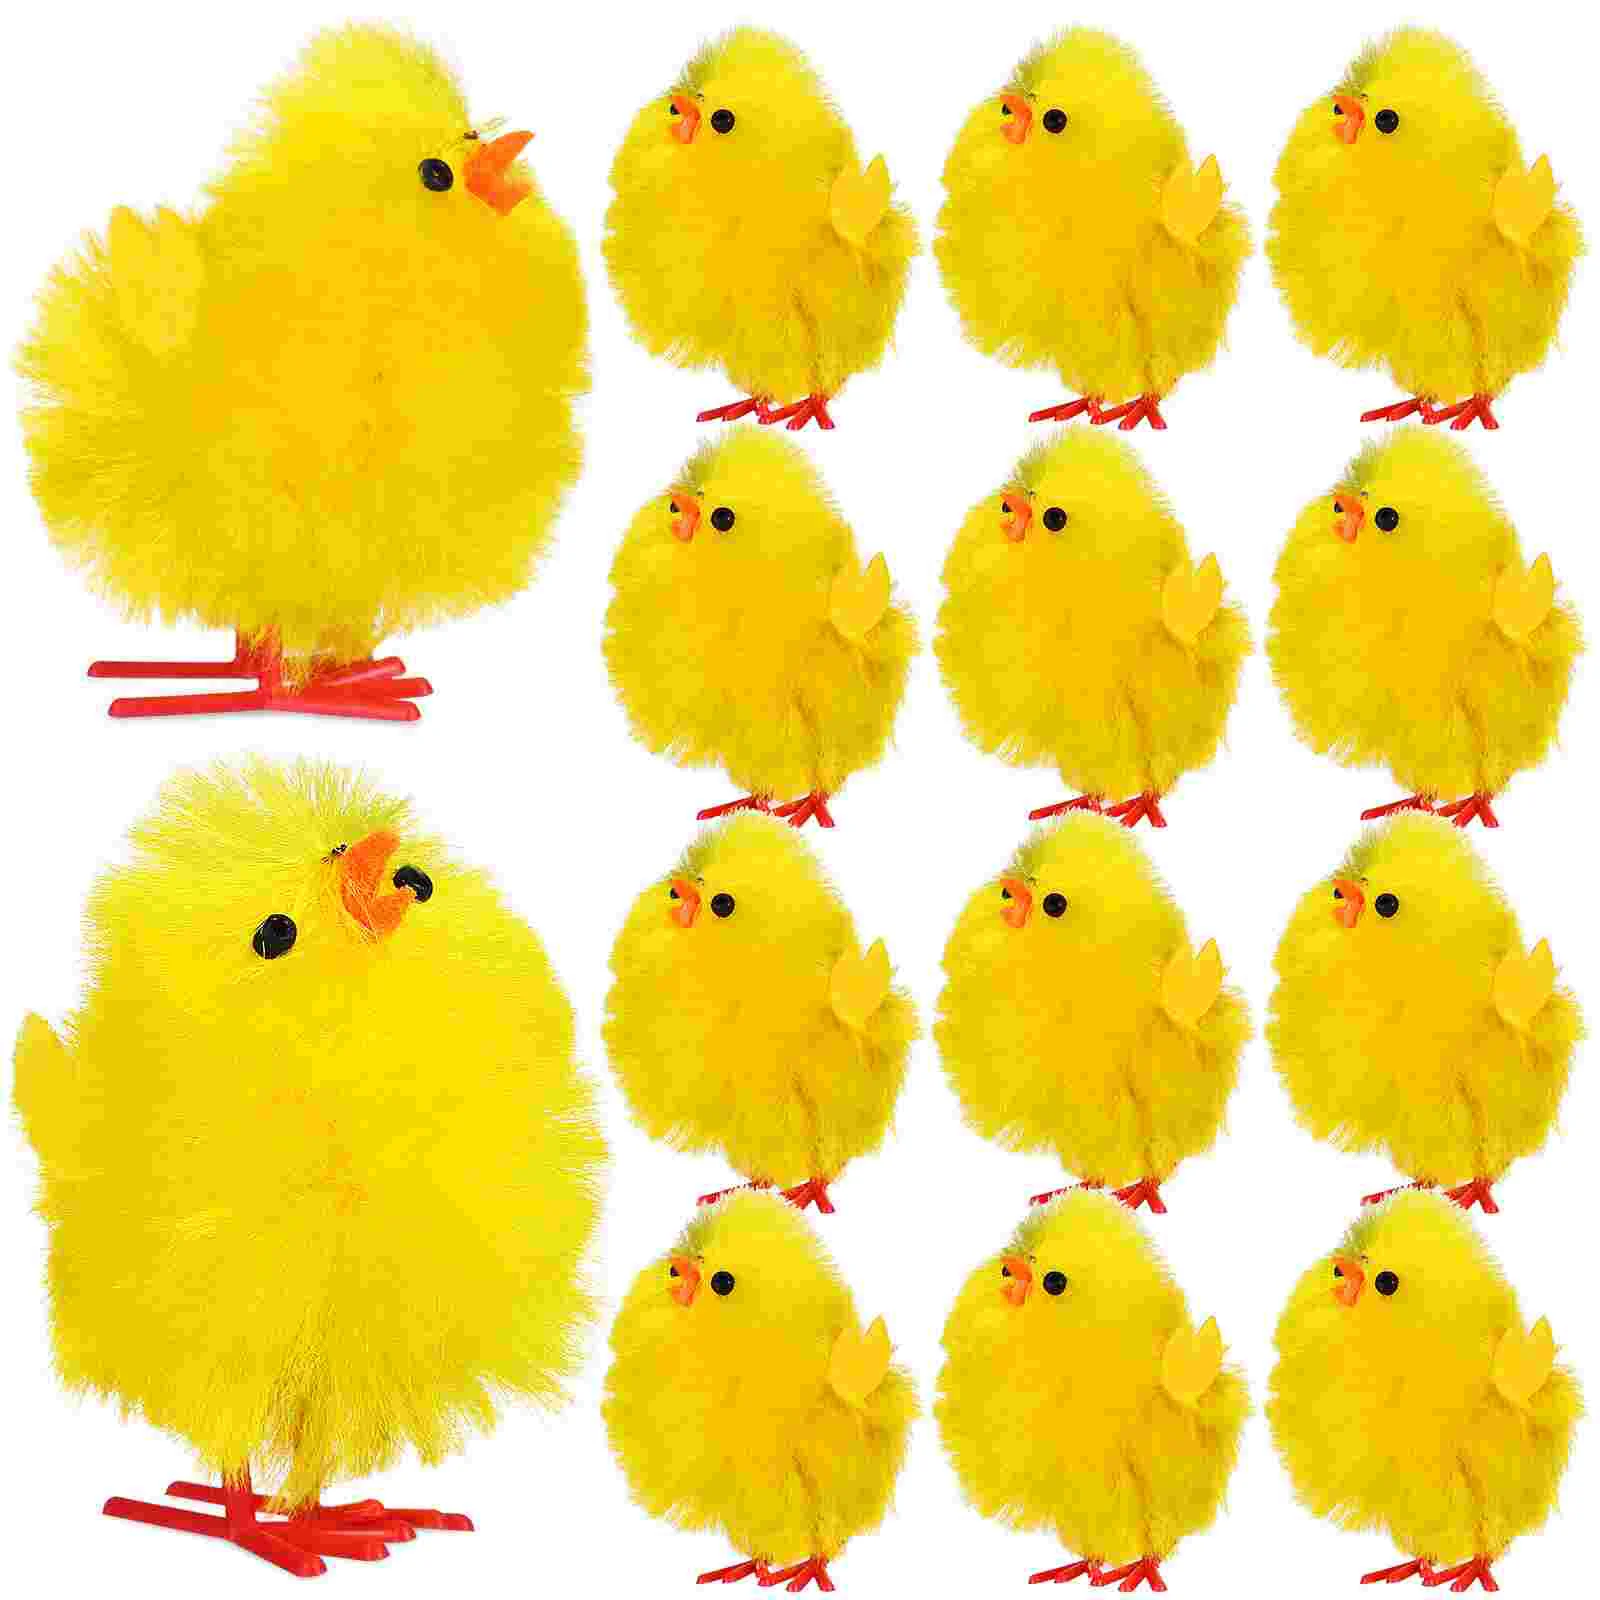 

36 Pcs Easter Chickens Little Chickens Easter Mini Chicks Baby Chickens Easter Chicks Decorations